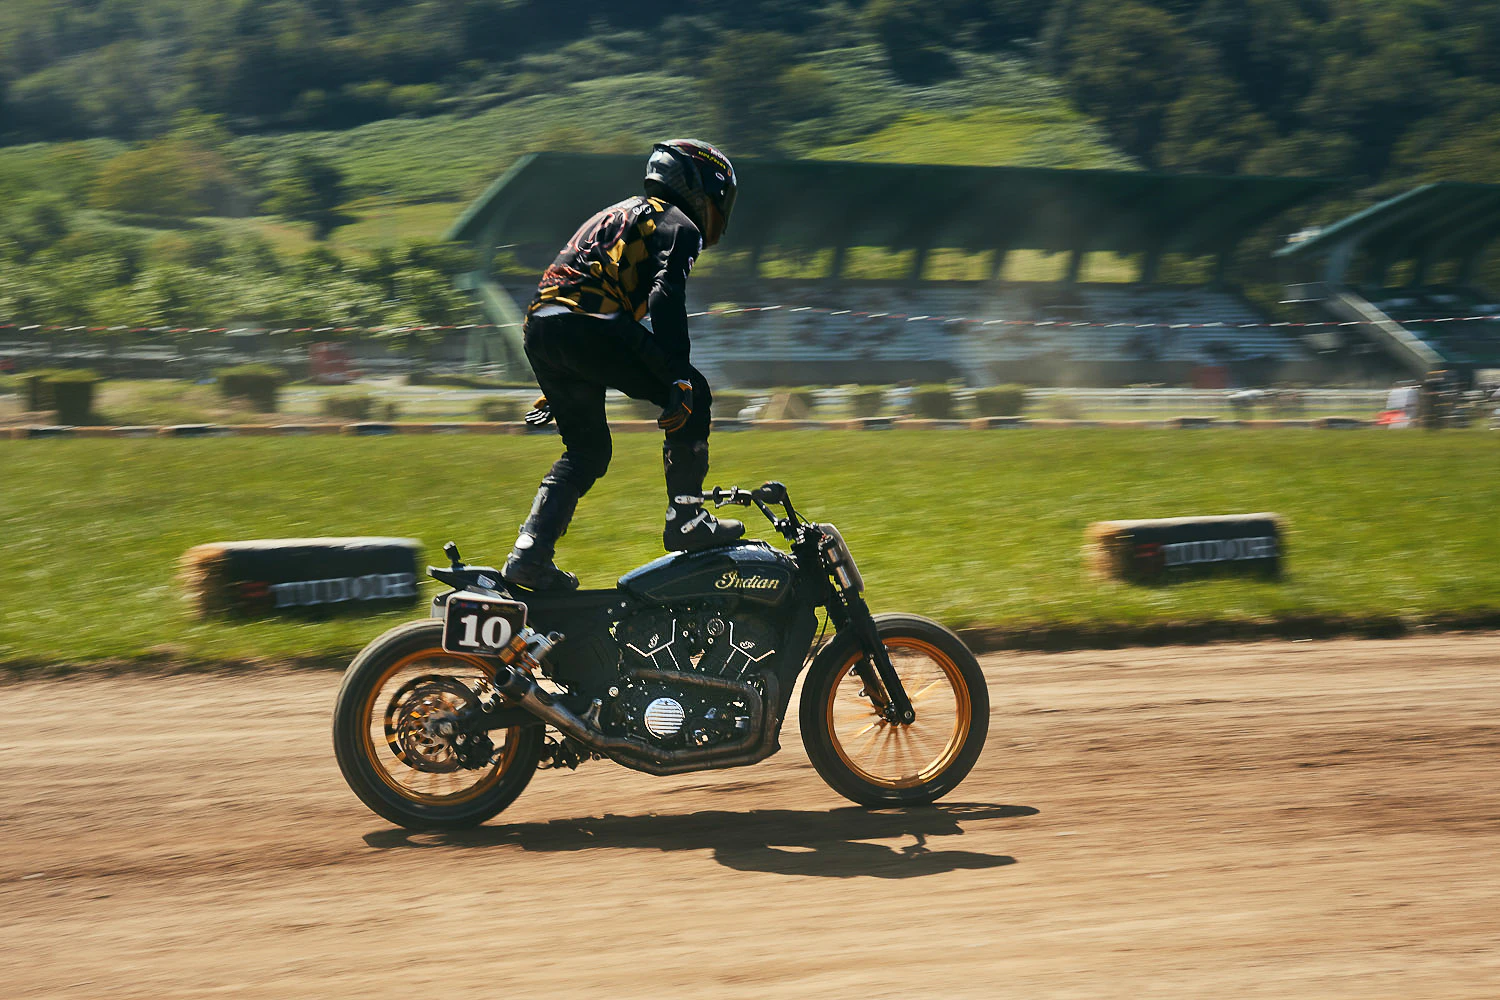 Wheels and Waves Fest 2019